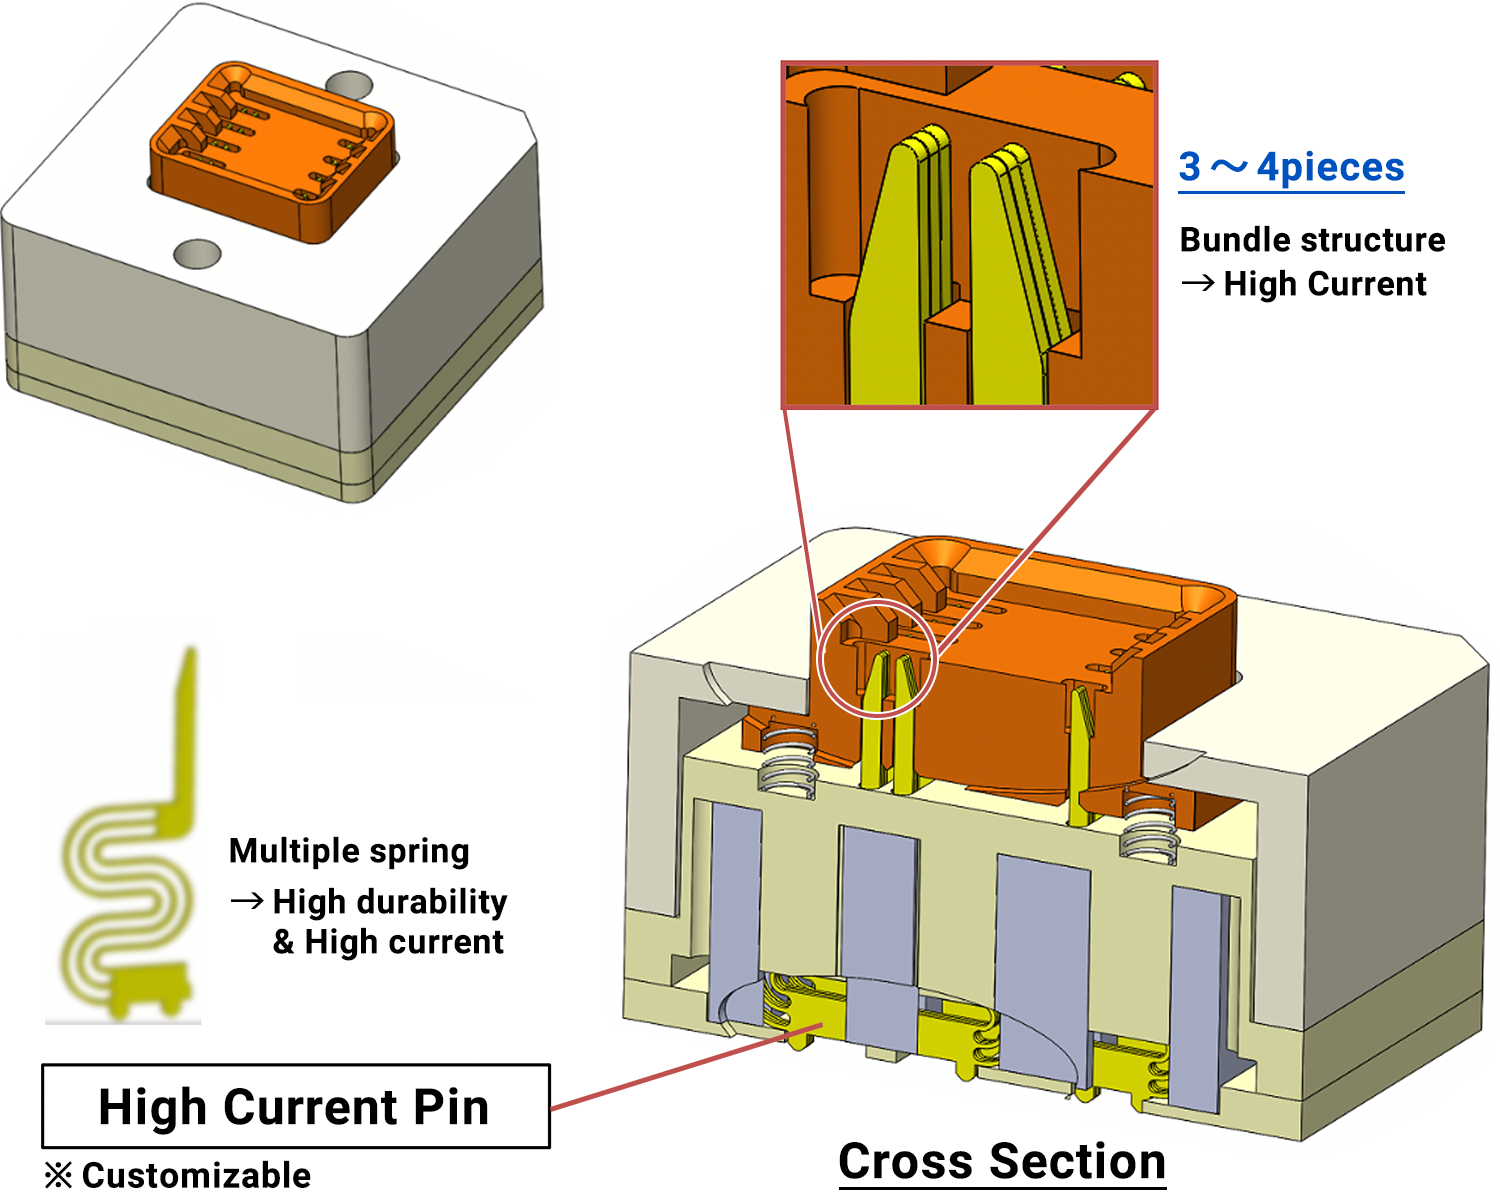 Test Sockets for Power IC / Multiple spring and Bundle Structure